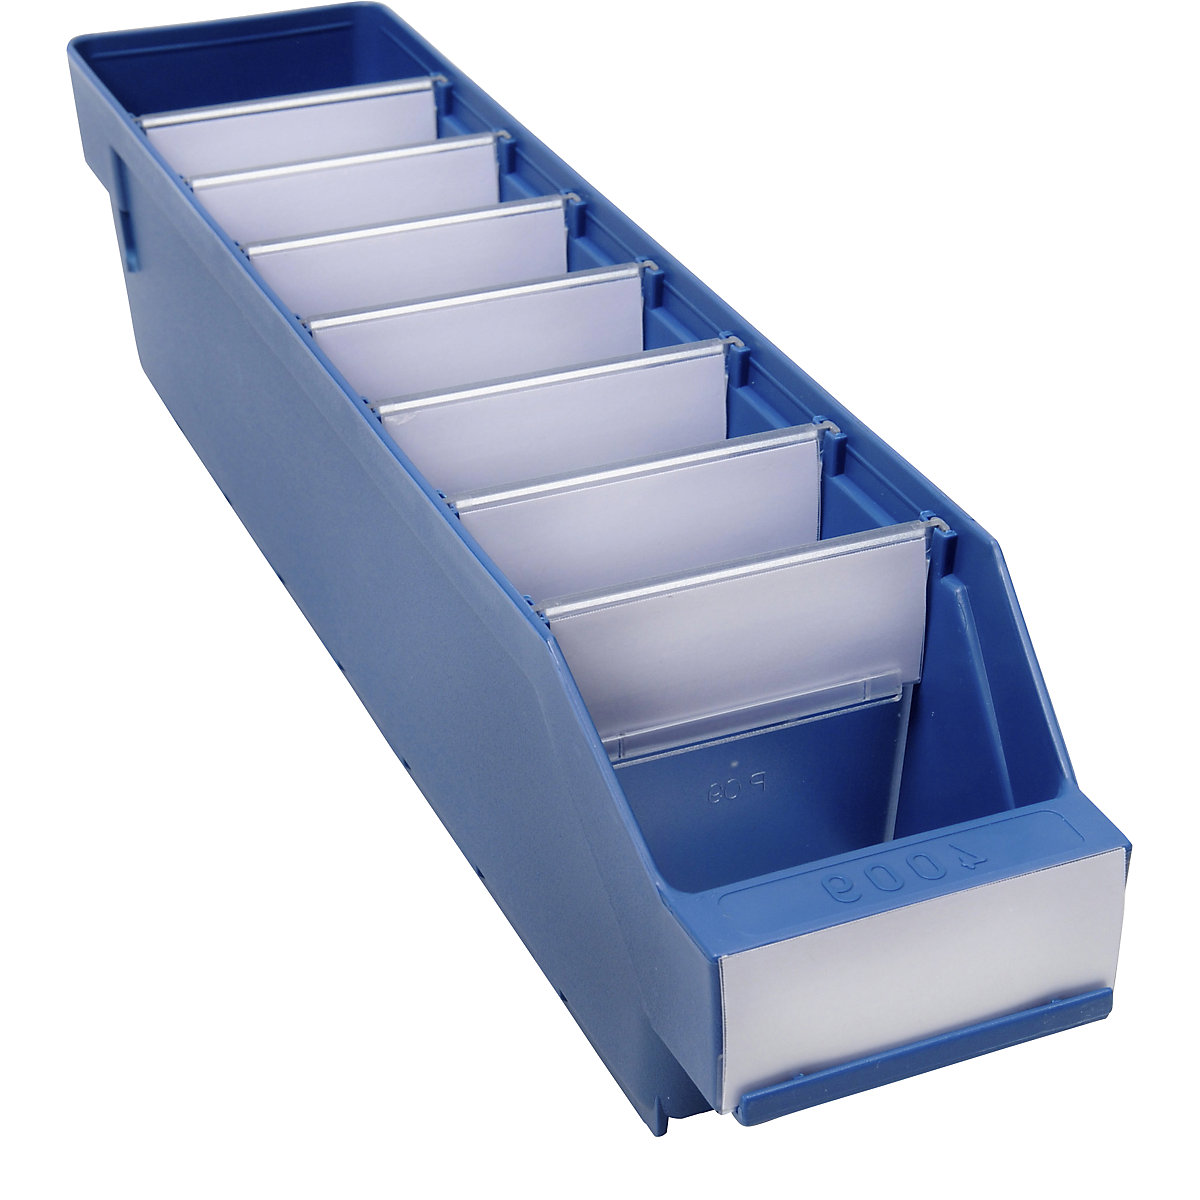 Shelf bin made of highly impact resistant polypropylene – STEMO, blue, LxWxH 400 x 90 x 95 mm, pack of 40-15